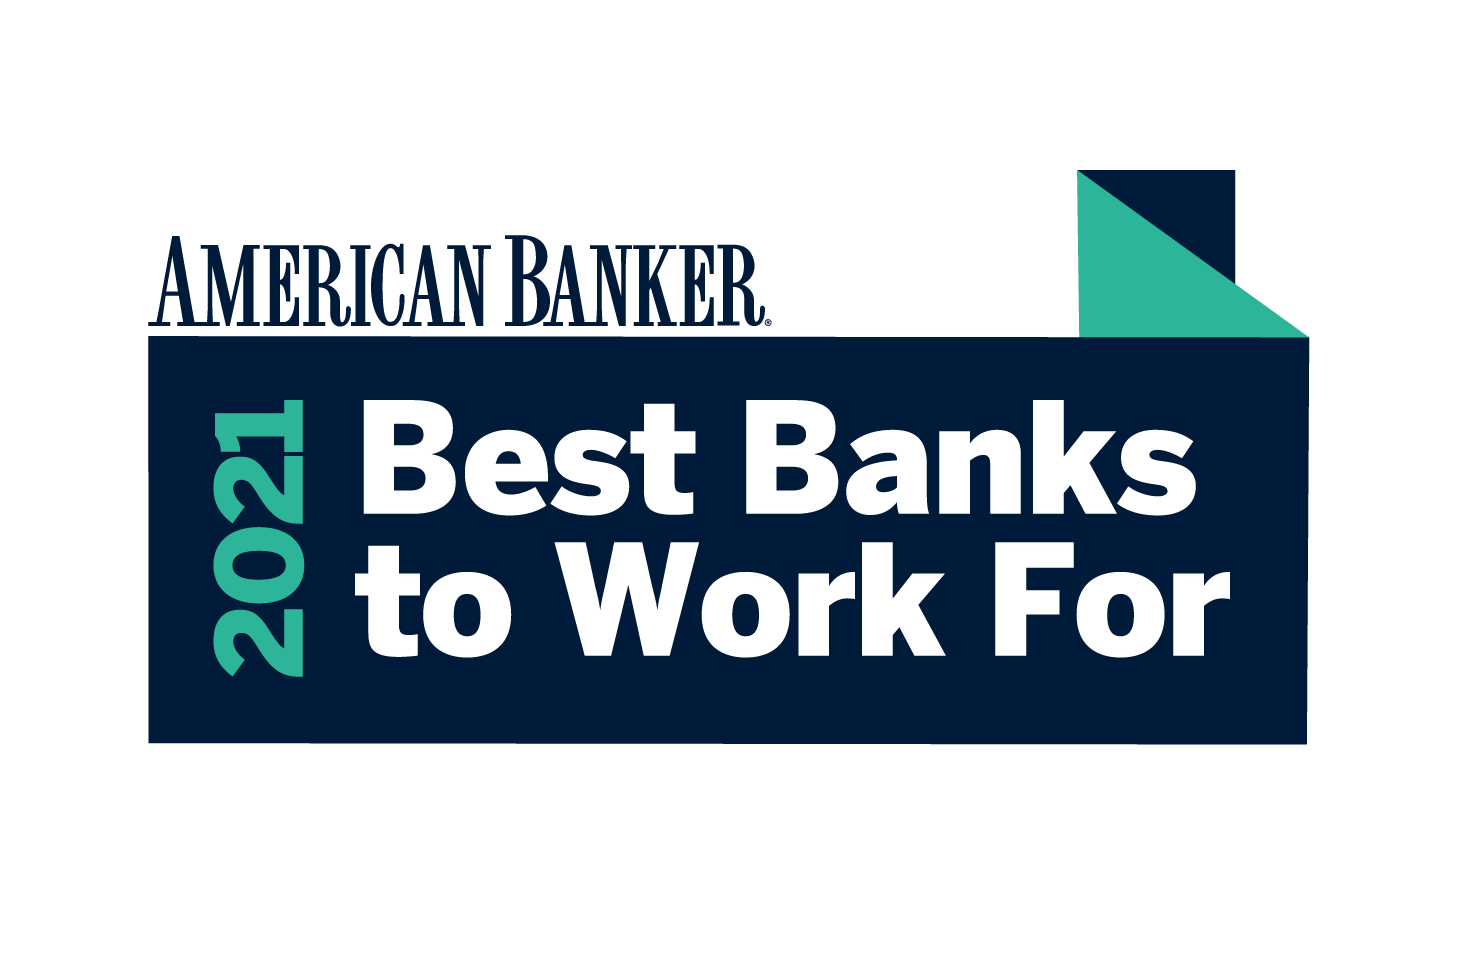 Ranked 2021 Best Banks to Work For by American Banker